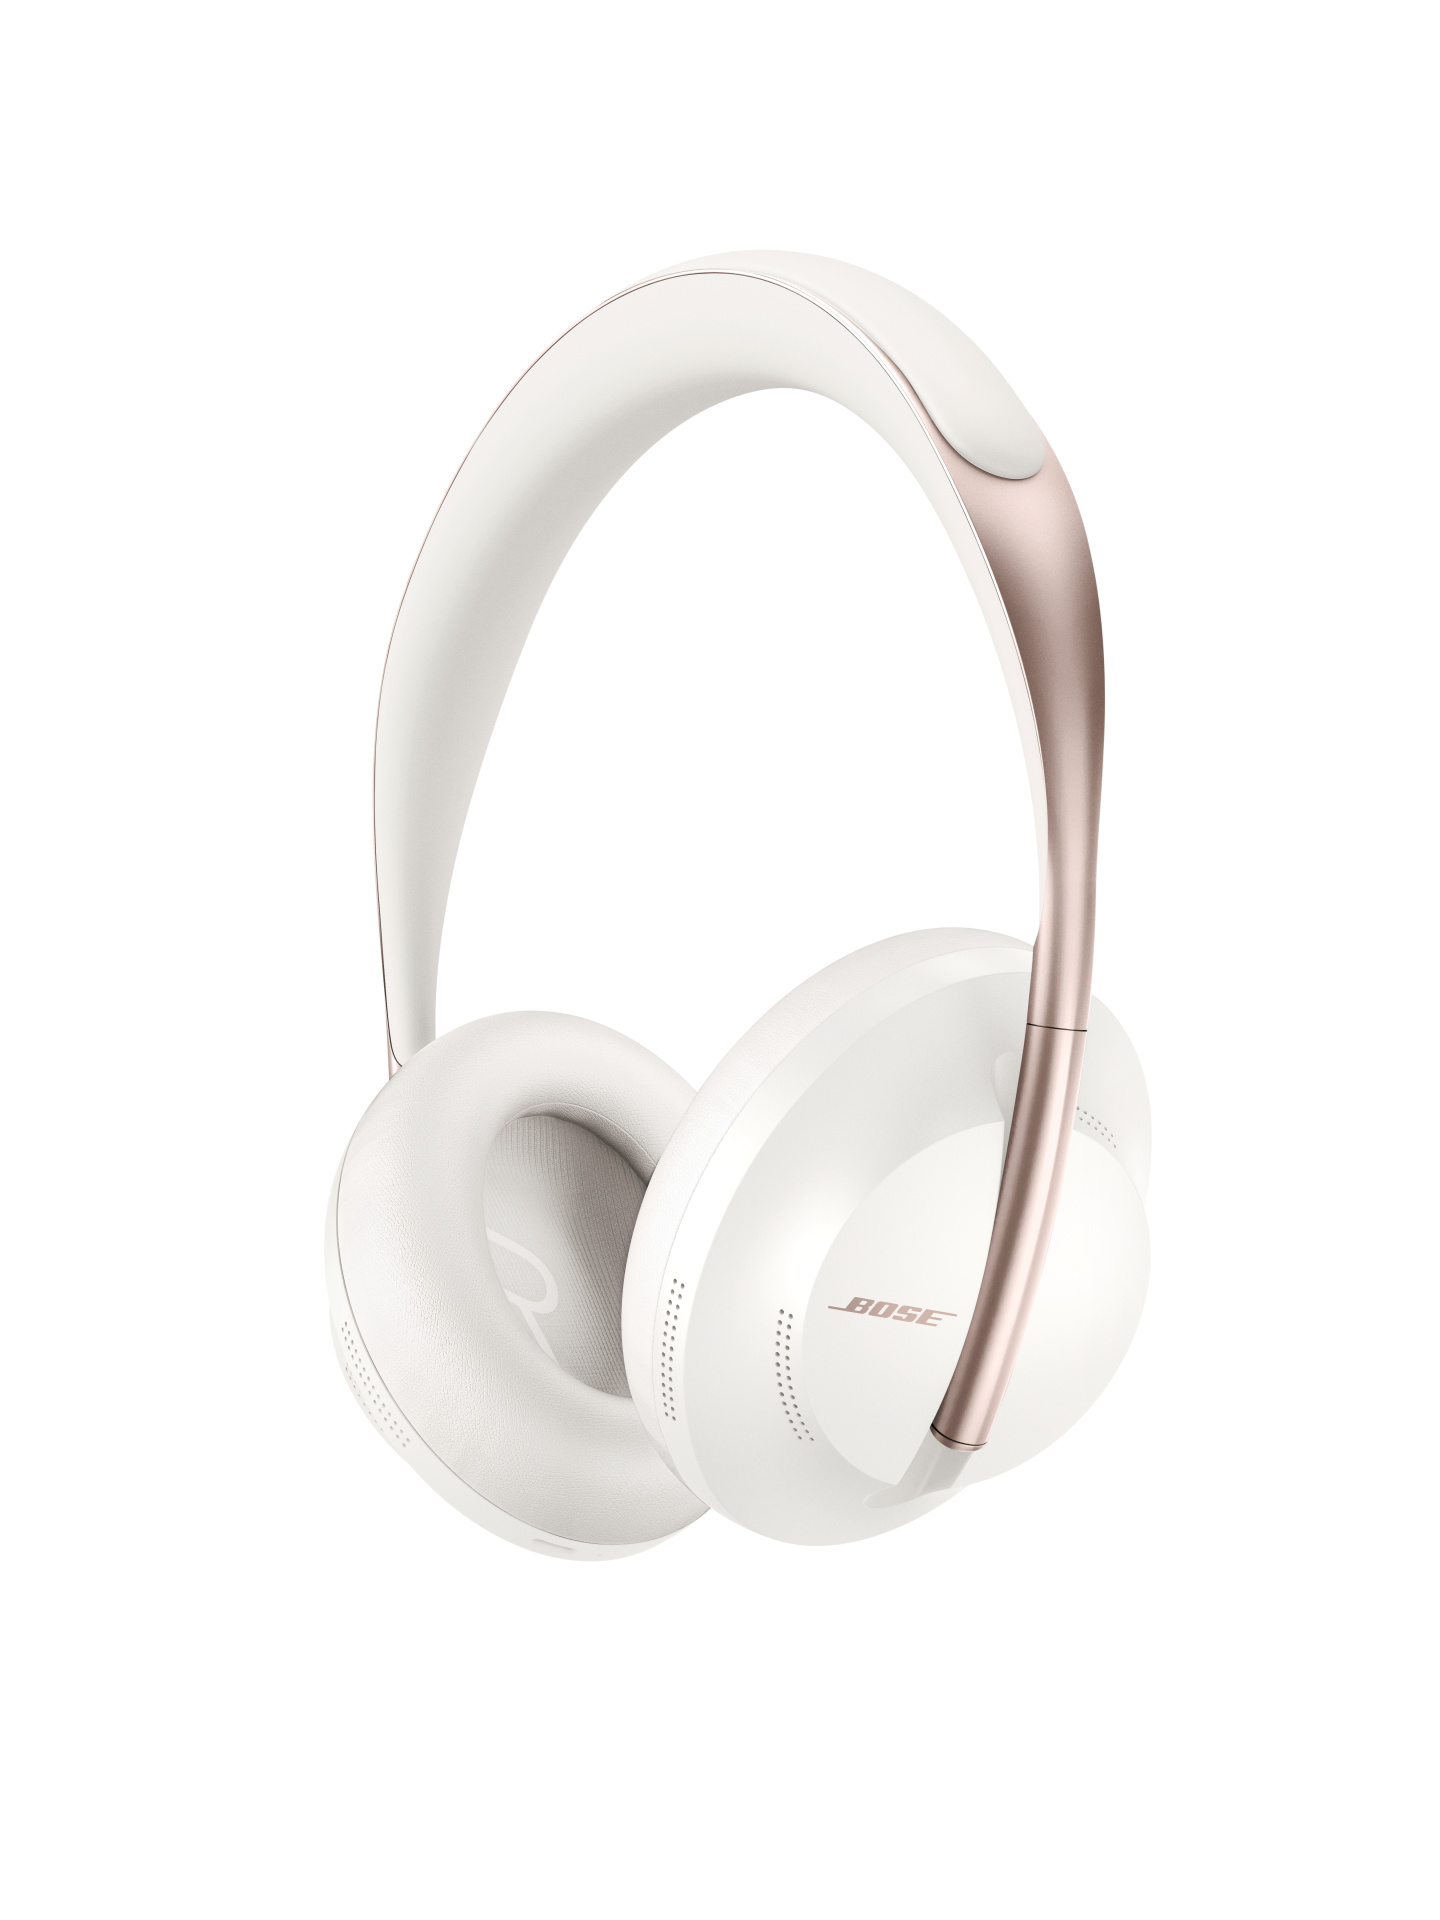 Bose Noise Cancelling Wireless Bluetooth Headphones